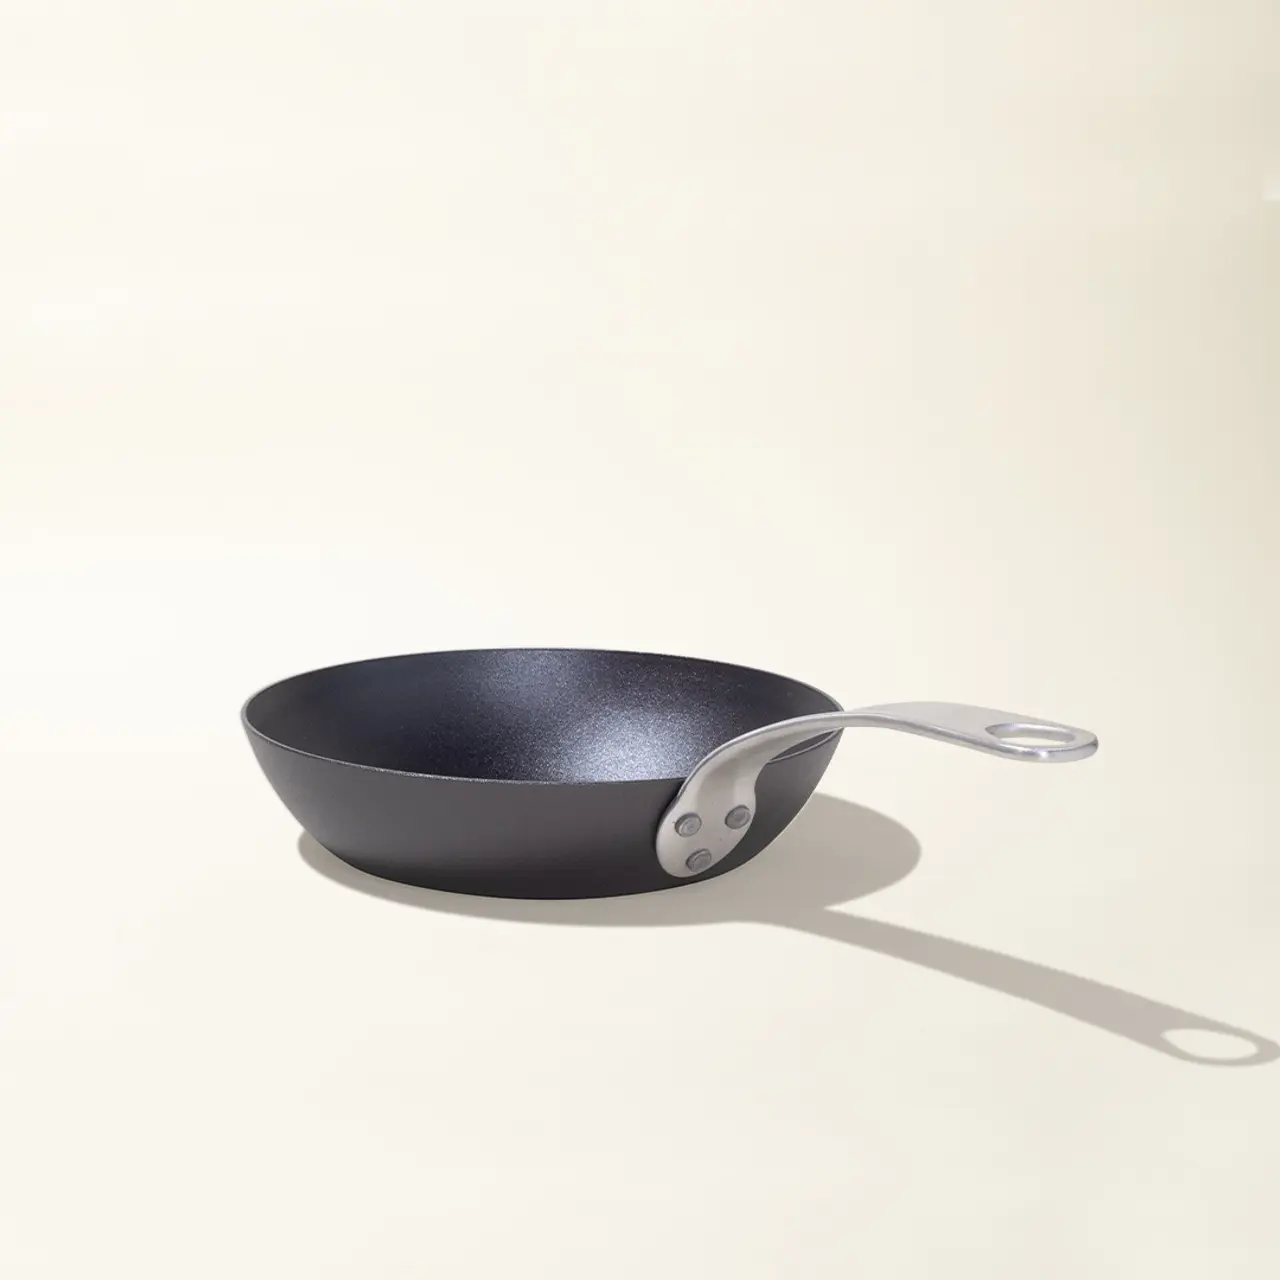 A black non-stick frying pan with a silver handle casts a shadow on a light surface.